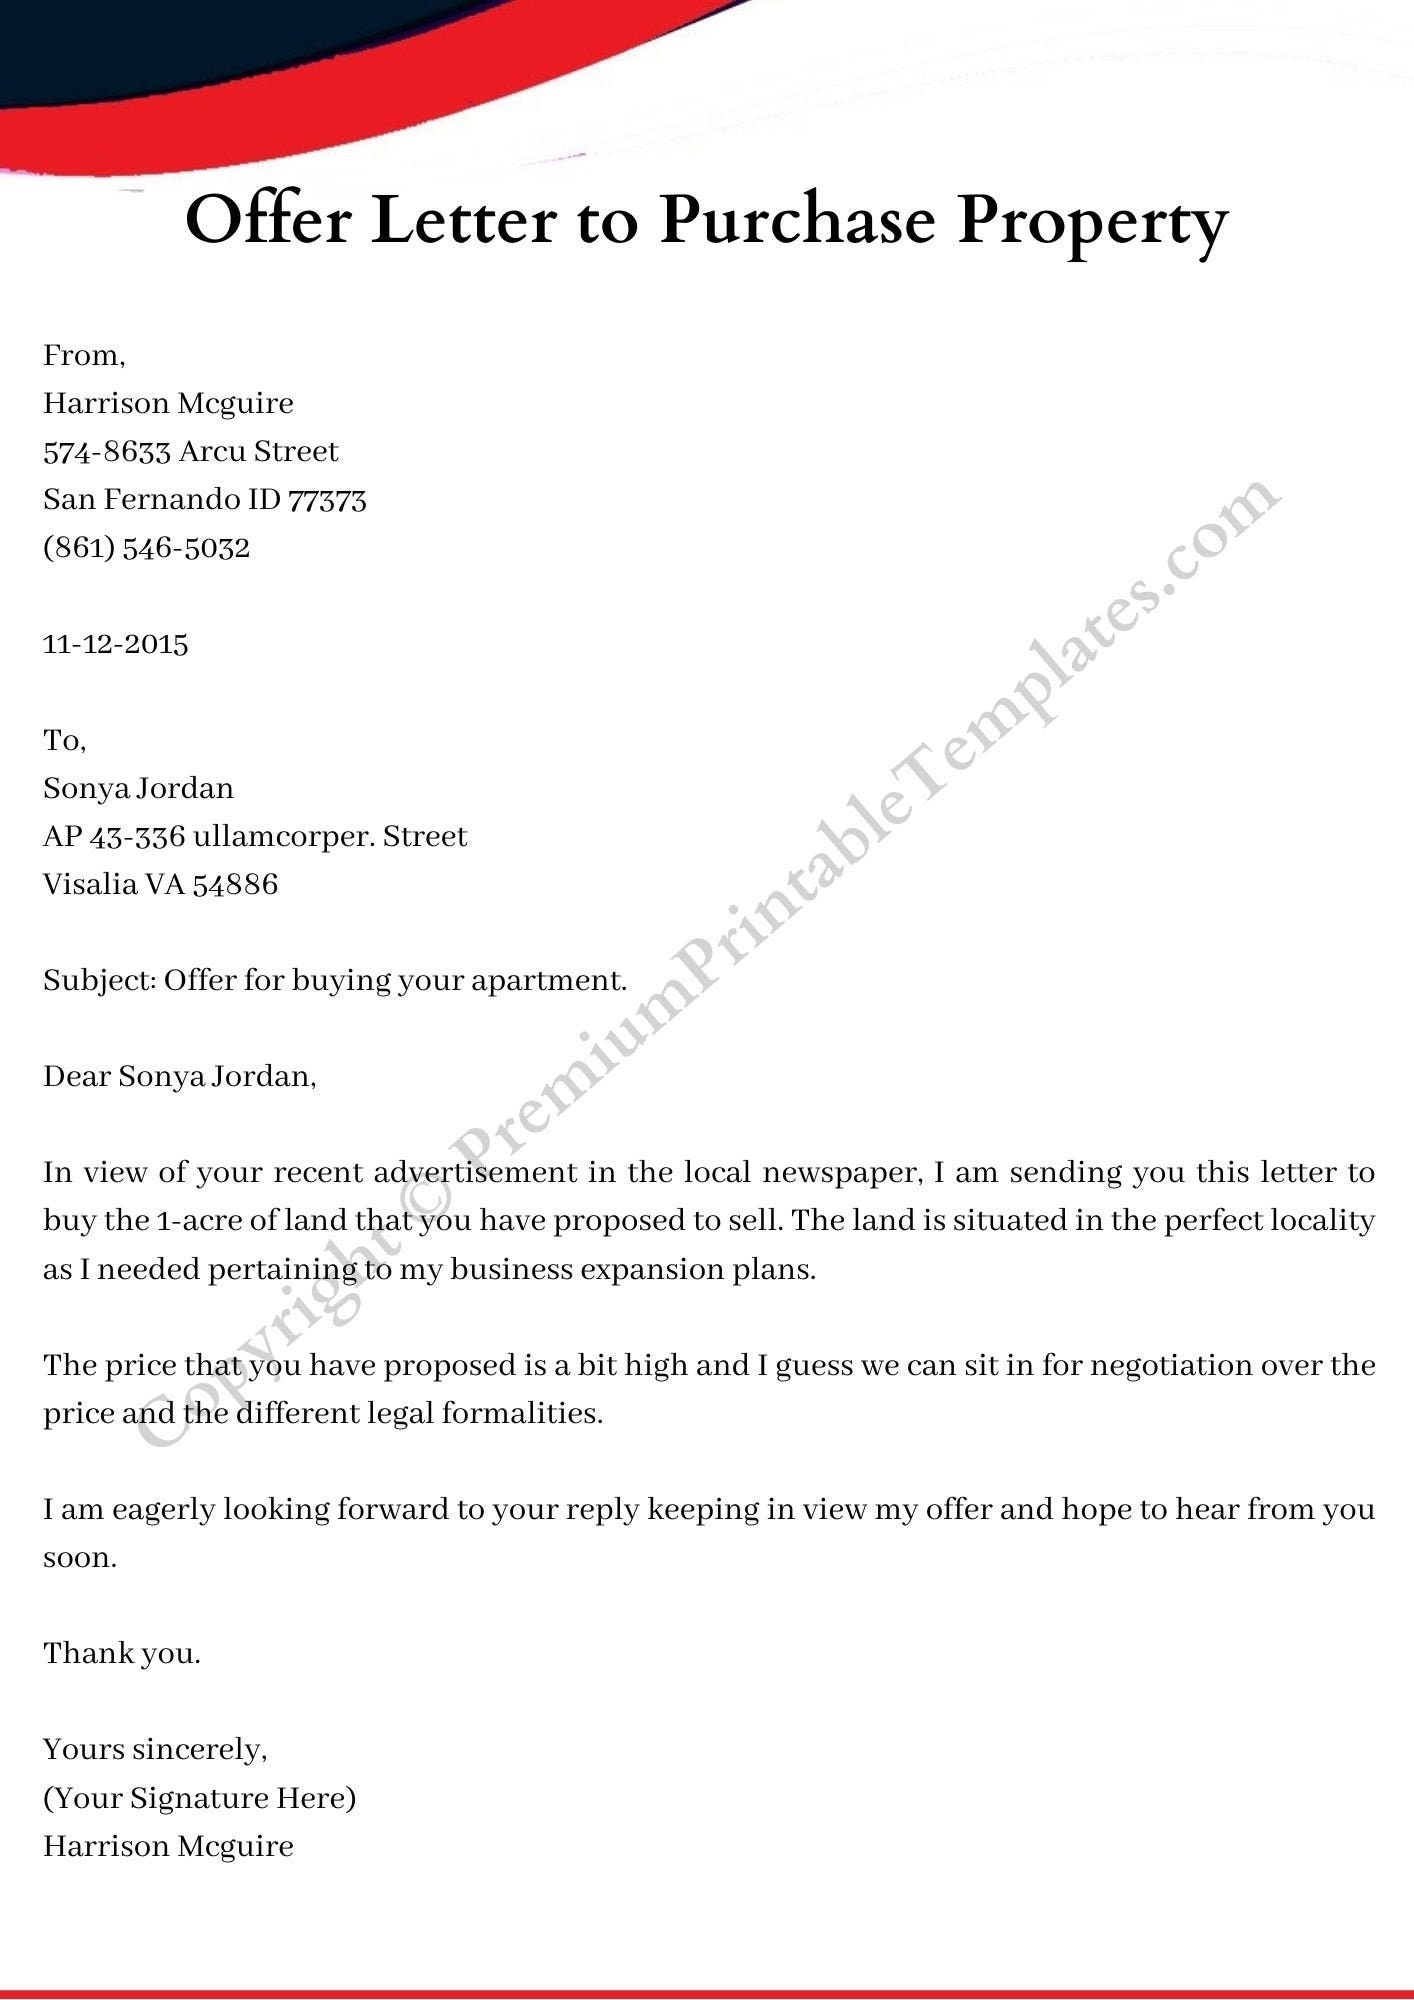 offer-letter-for-home-purchase-template